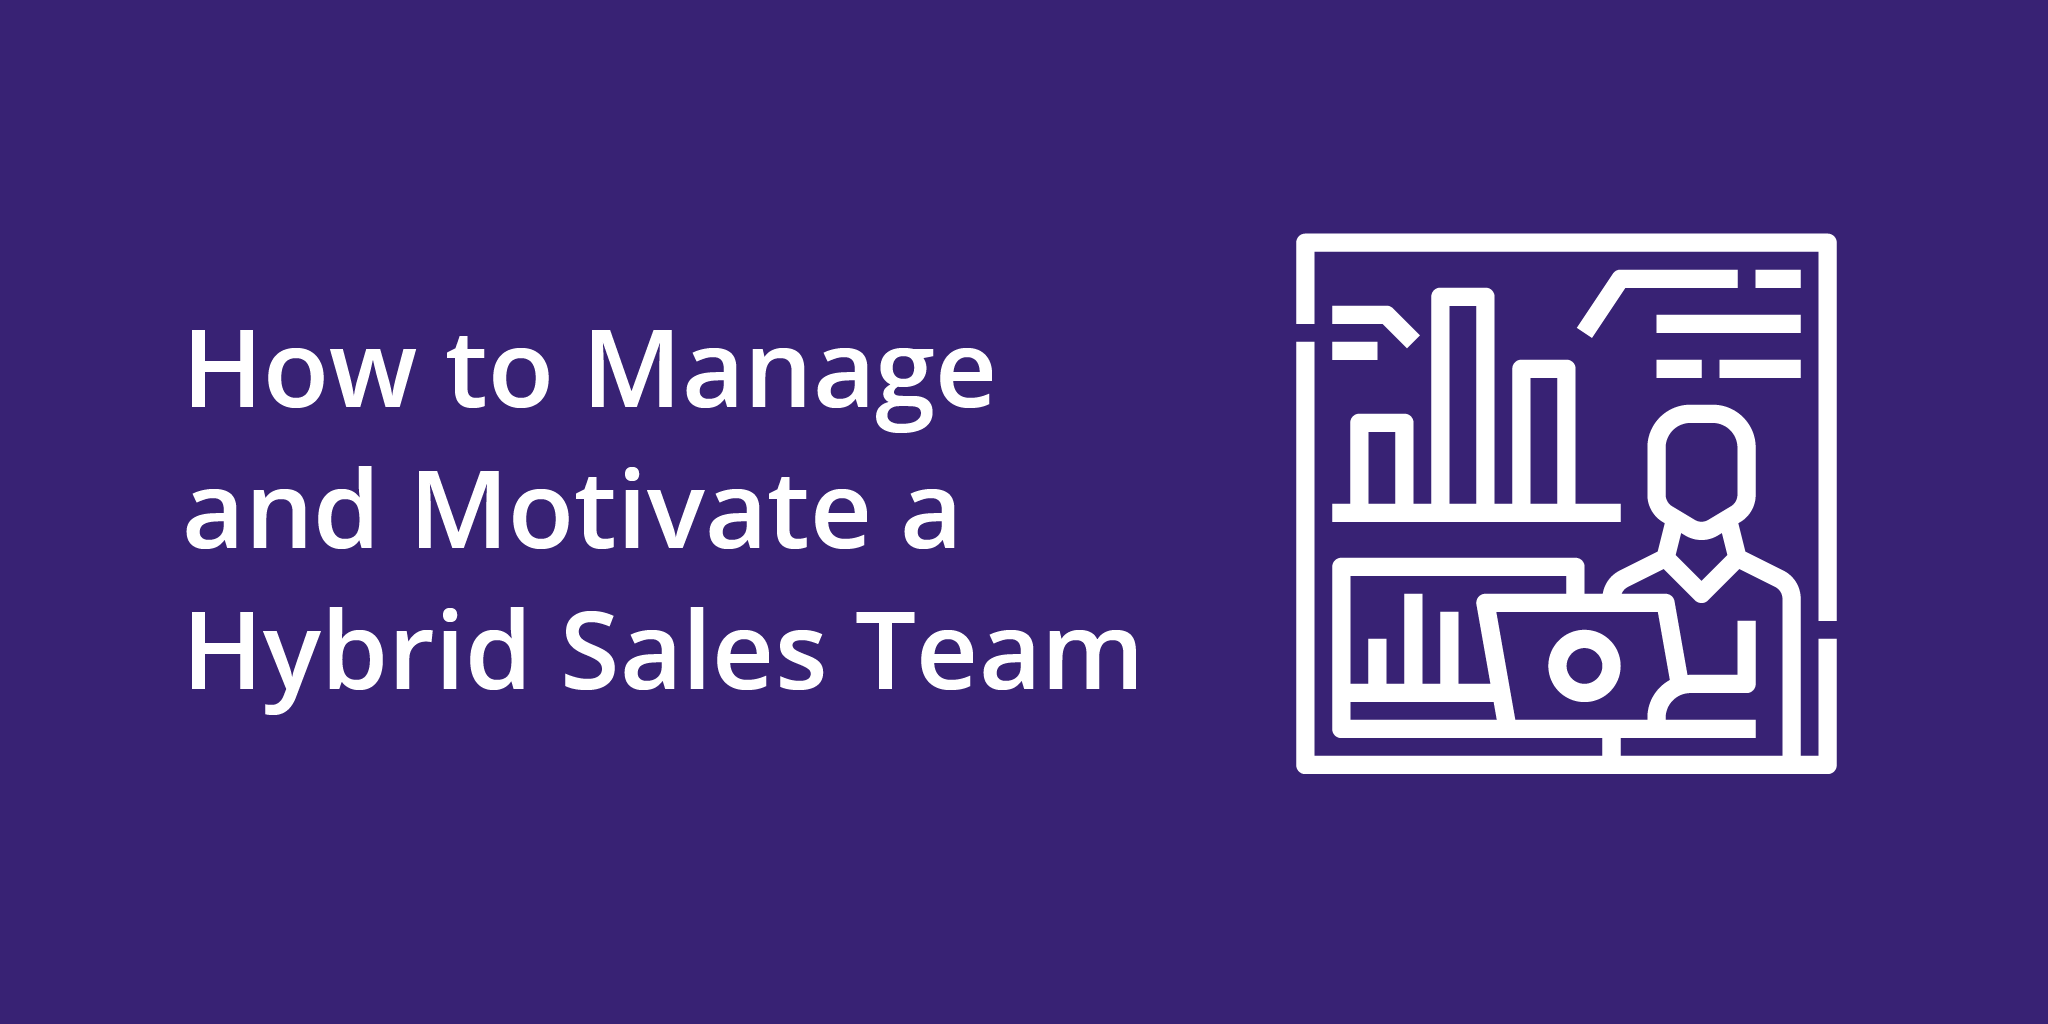 How to Manage and Motivate a Hybrid Sales Team | Telephones for business